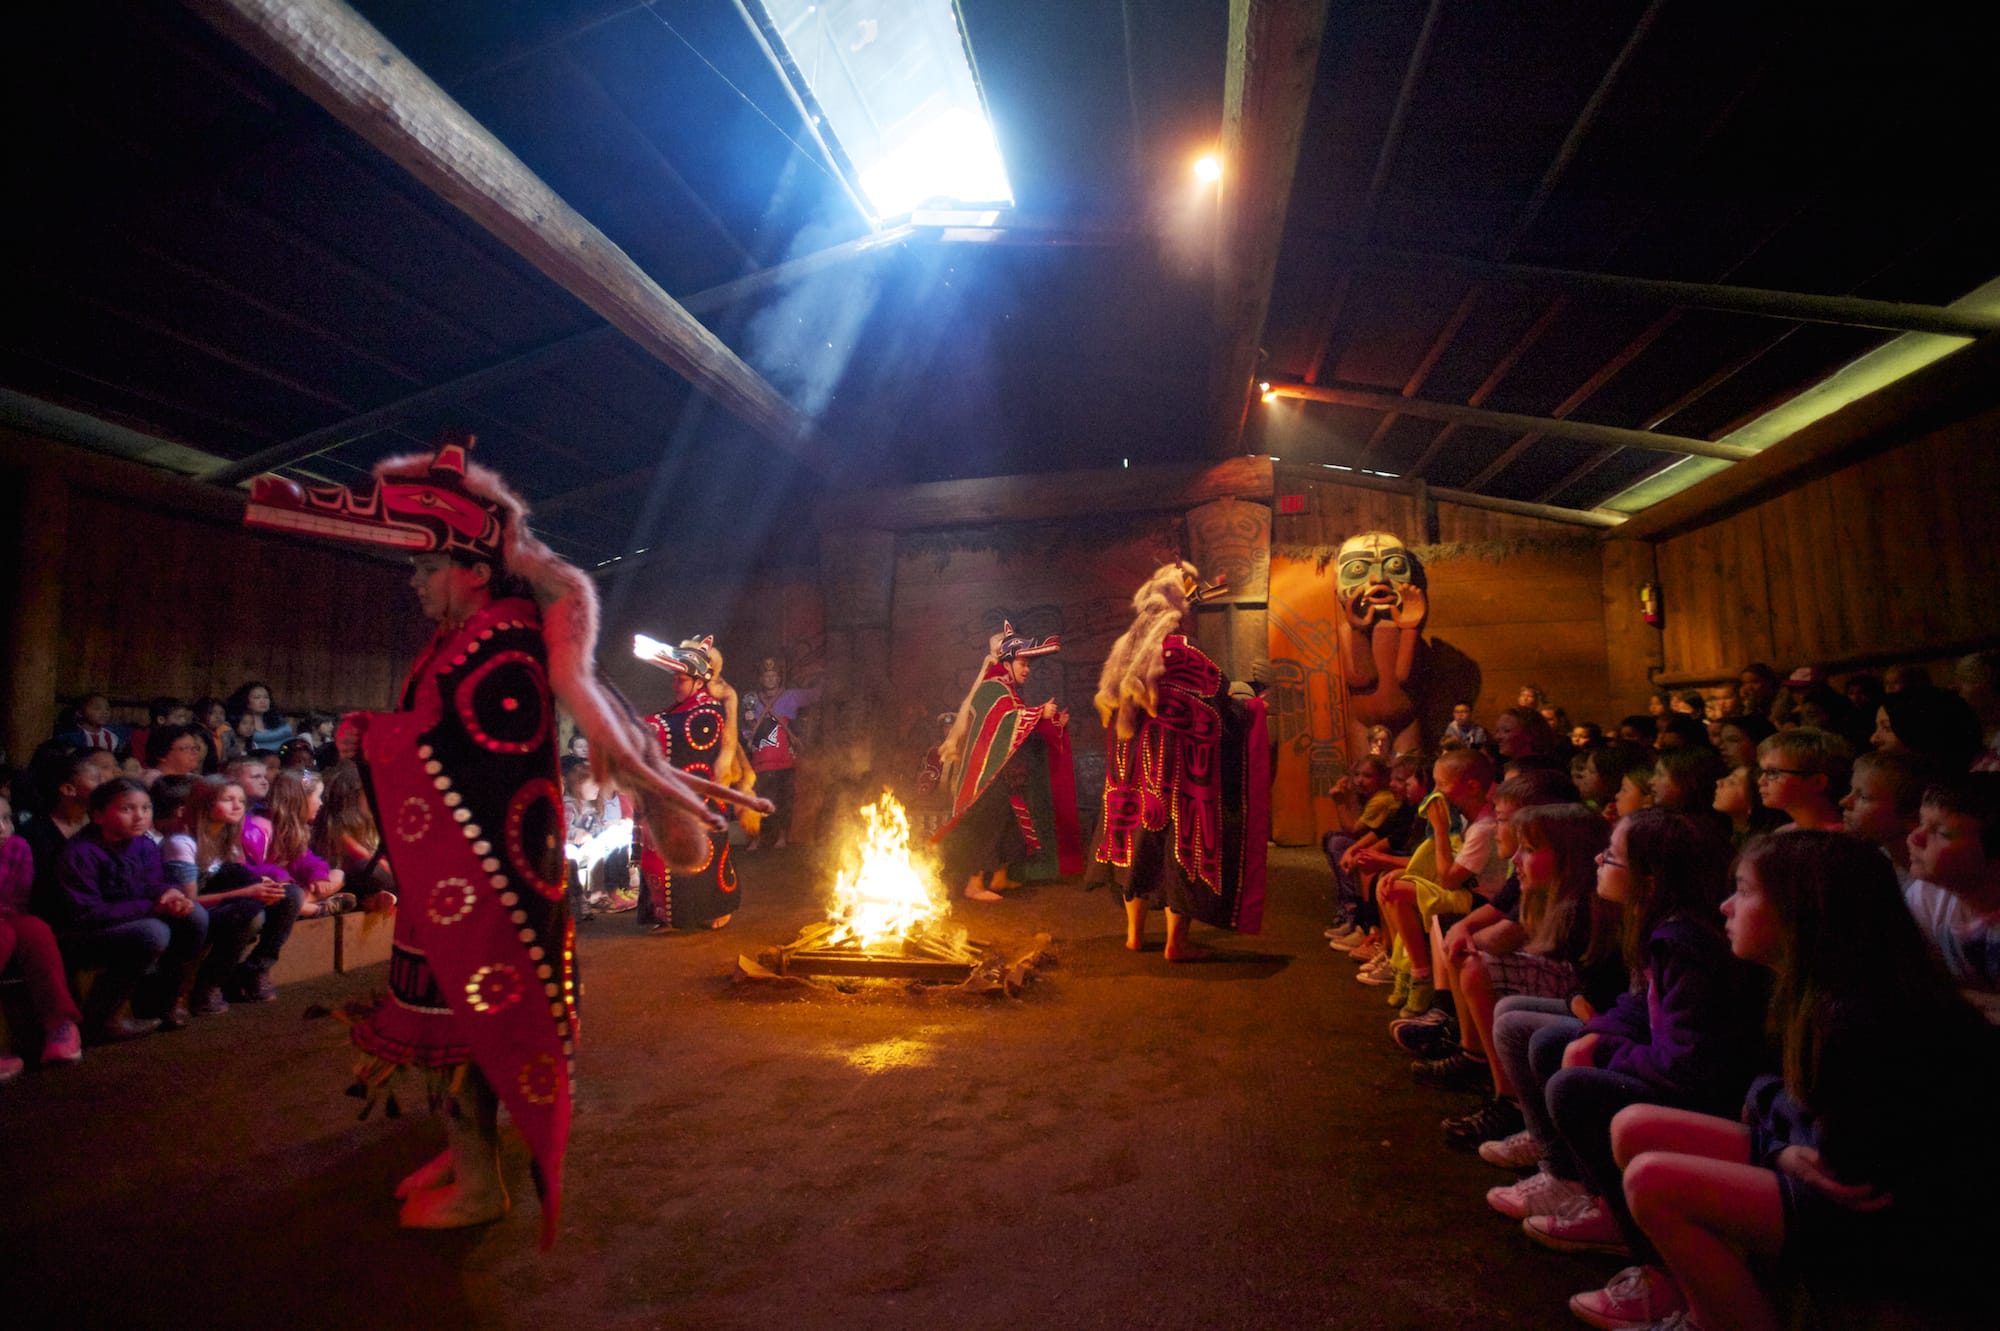 Students were entertained with stories, music and masked dancers during the one-hour program.